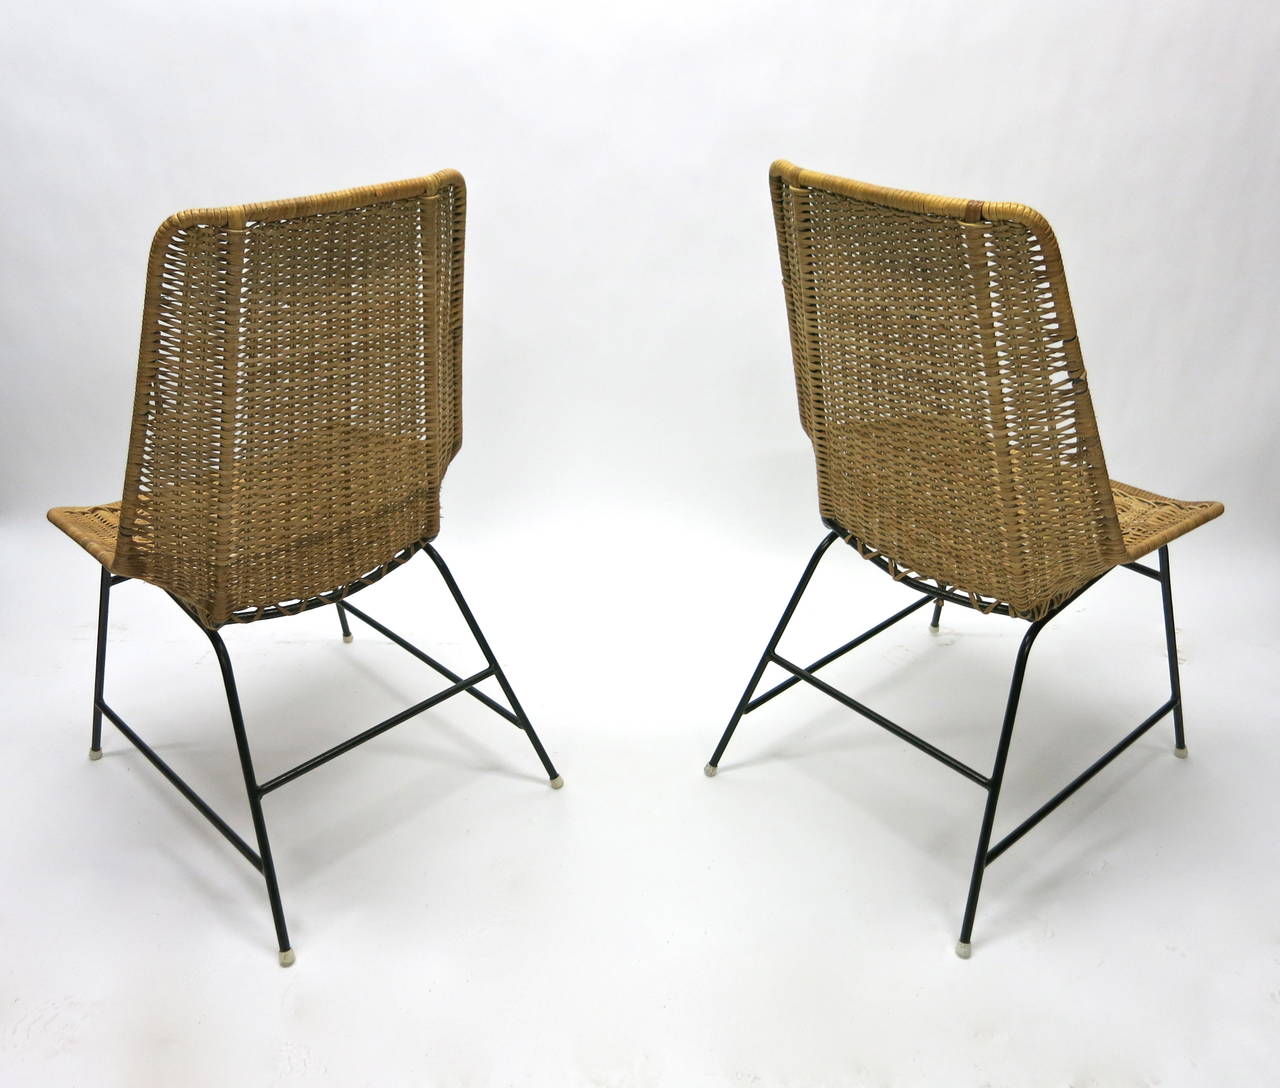 Pair of chairs each with tubular steel metal frames and woven caned seats.